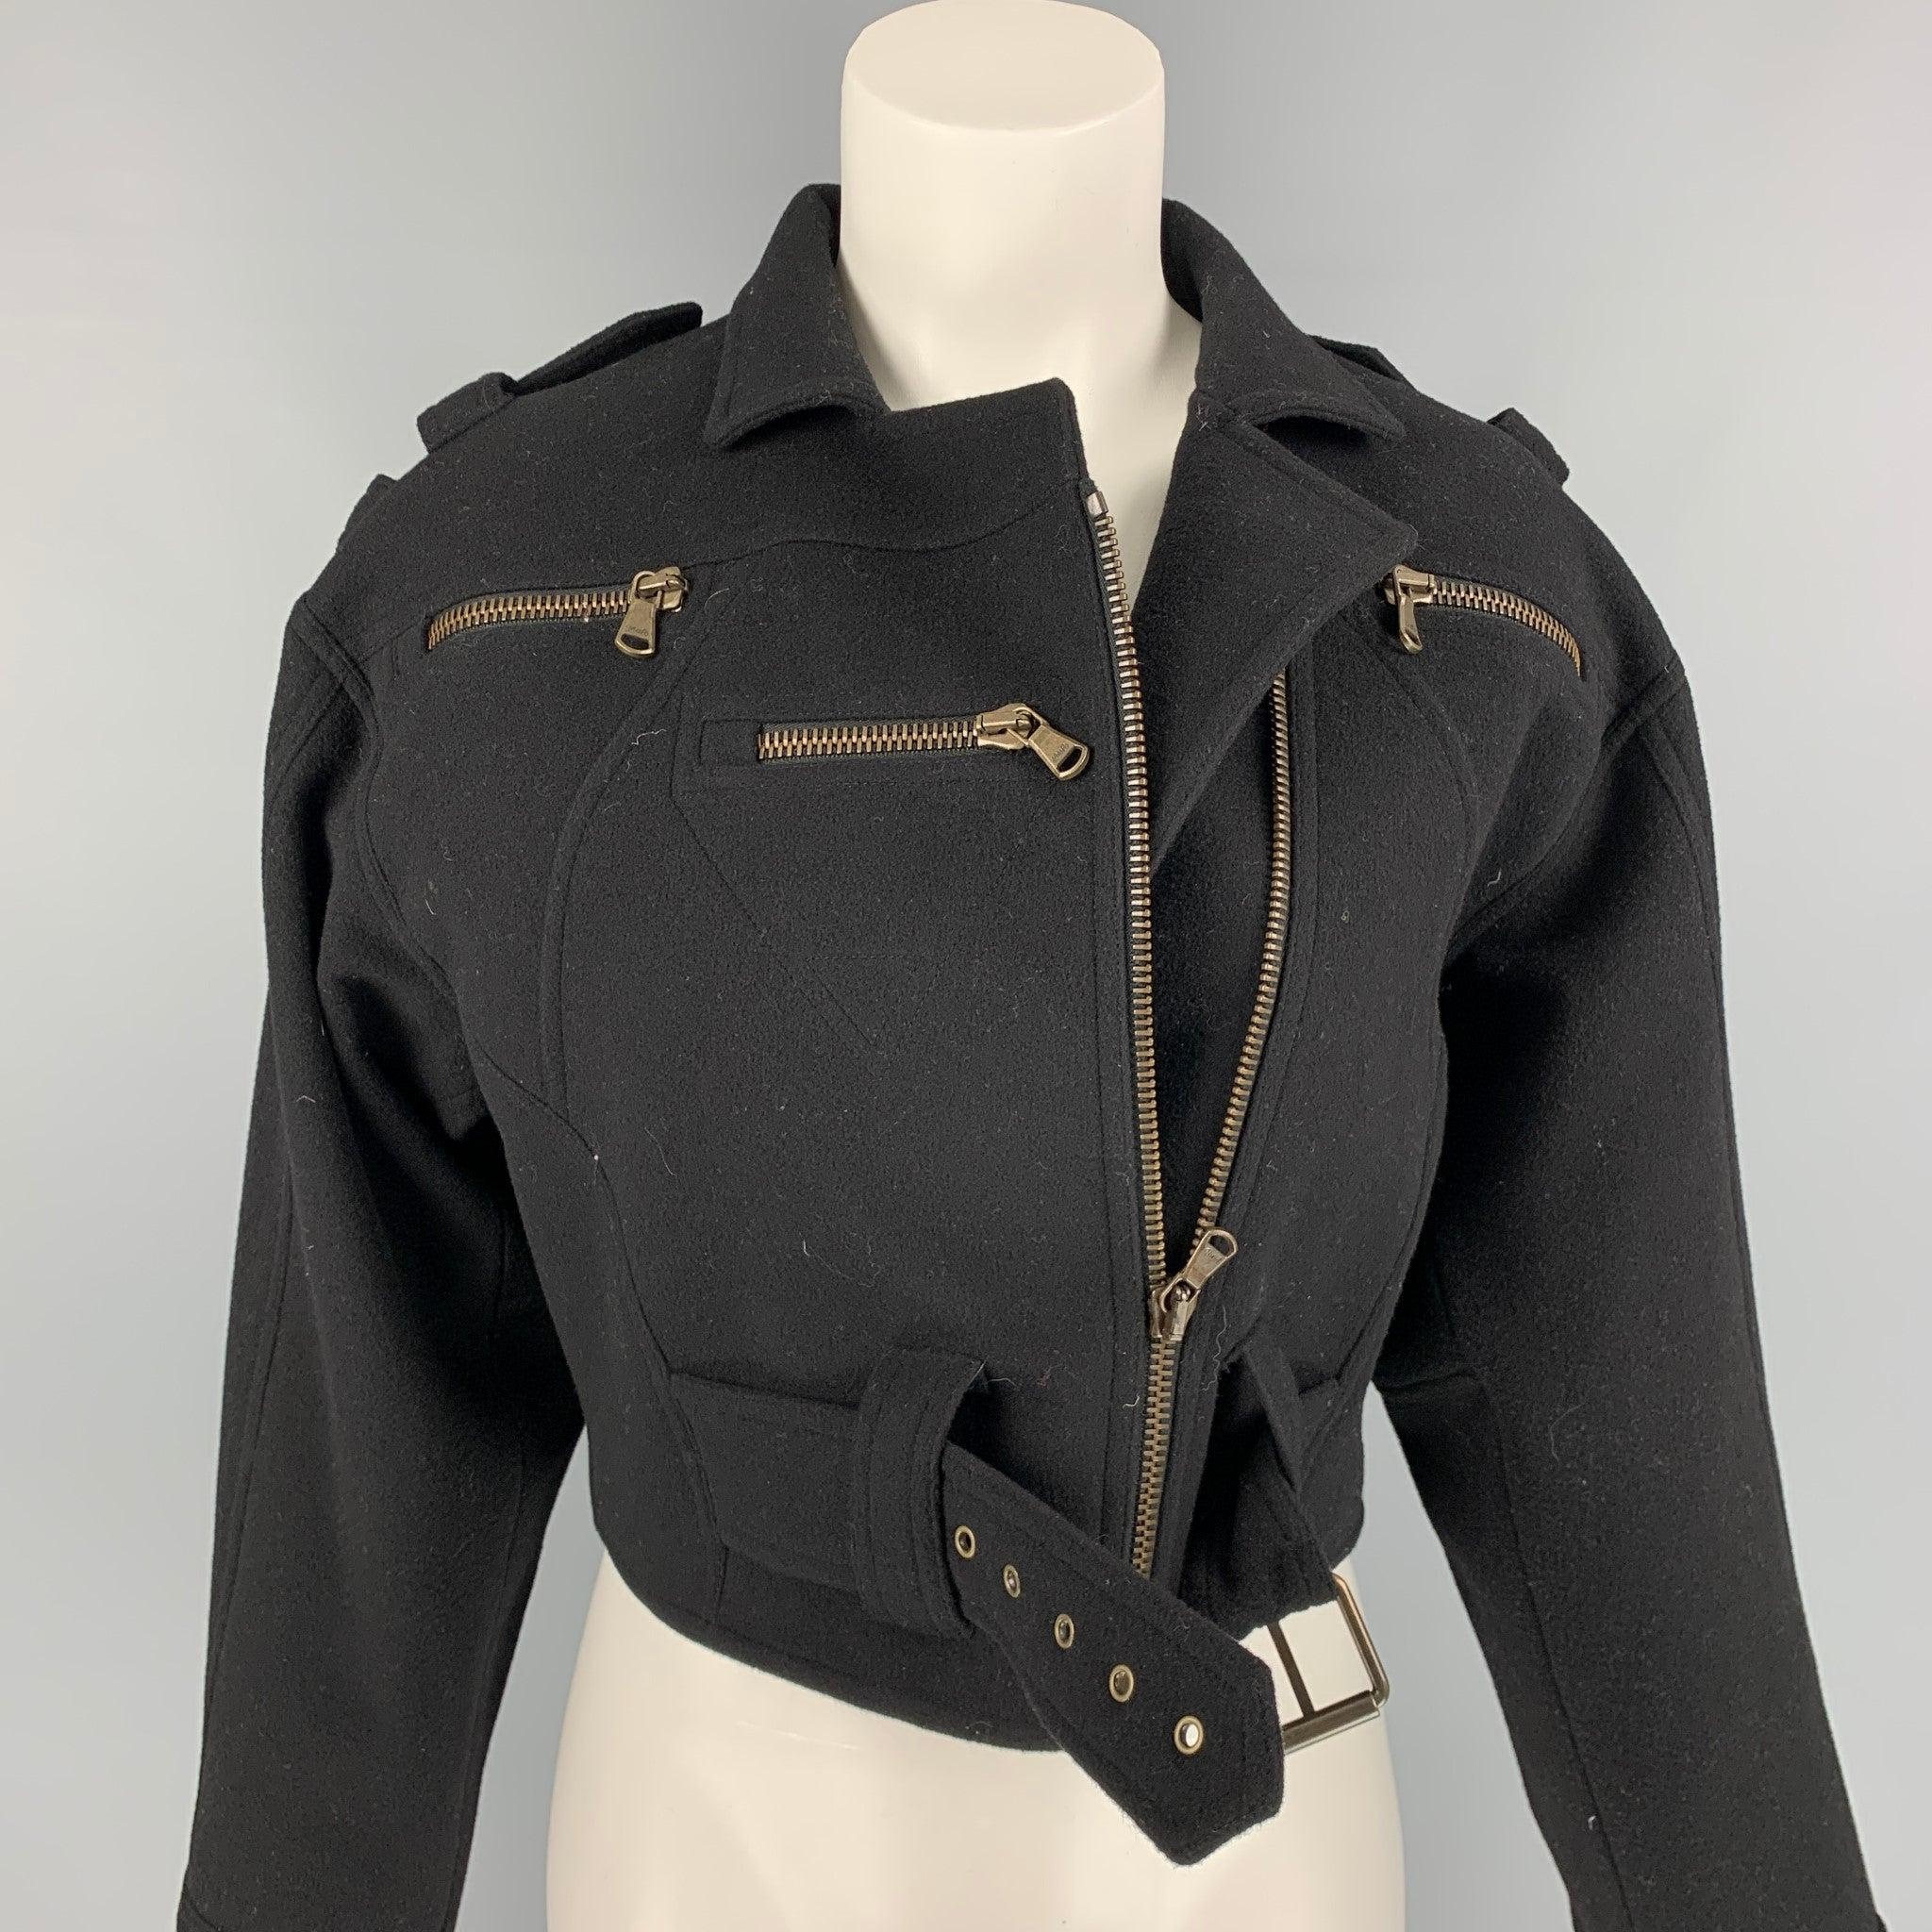 RALPH LAUREN Collection jacket comes in a black wool / cashmere featuring a cropped style, belted, zipper pockets, and a zip up closure. Made in Italy.
Very Good
Pre-Owned Condition. 

Marked:   6 

Measurements: 
 
Shoulder: 18 inches  Bust: 38